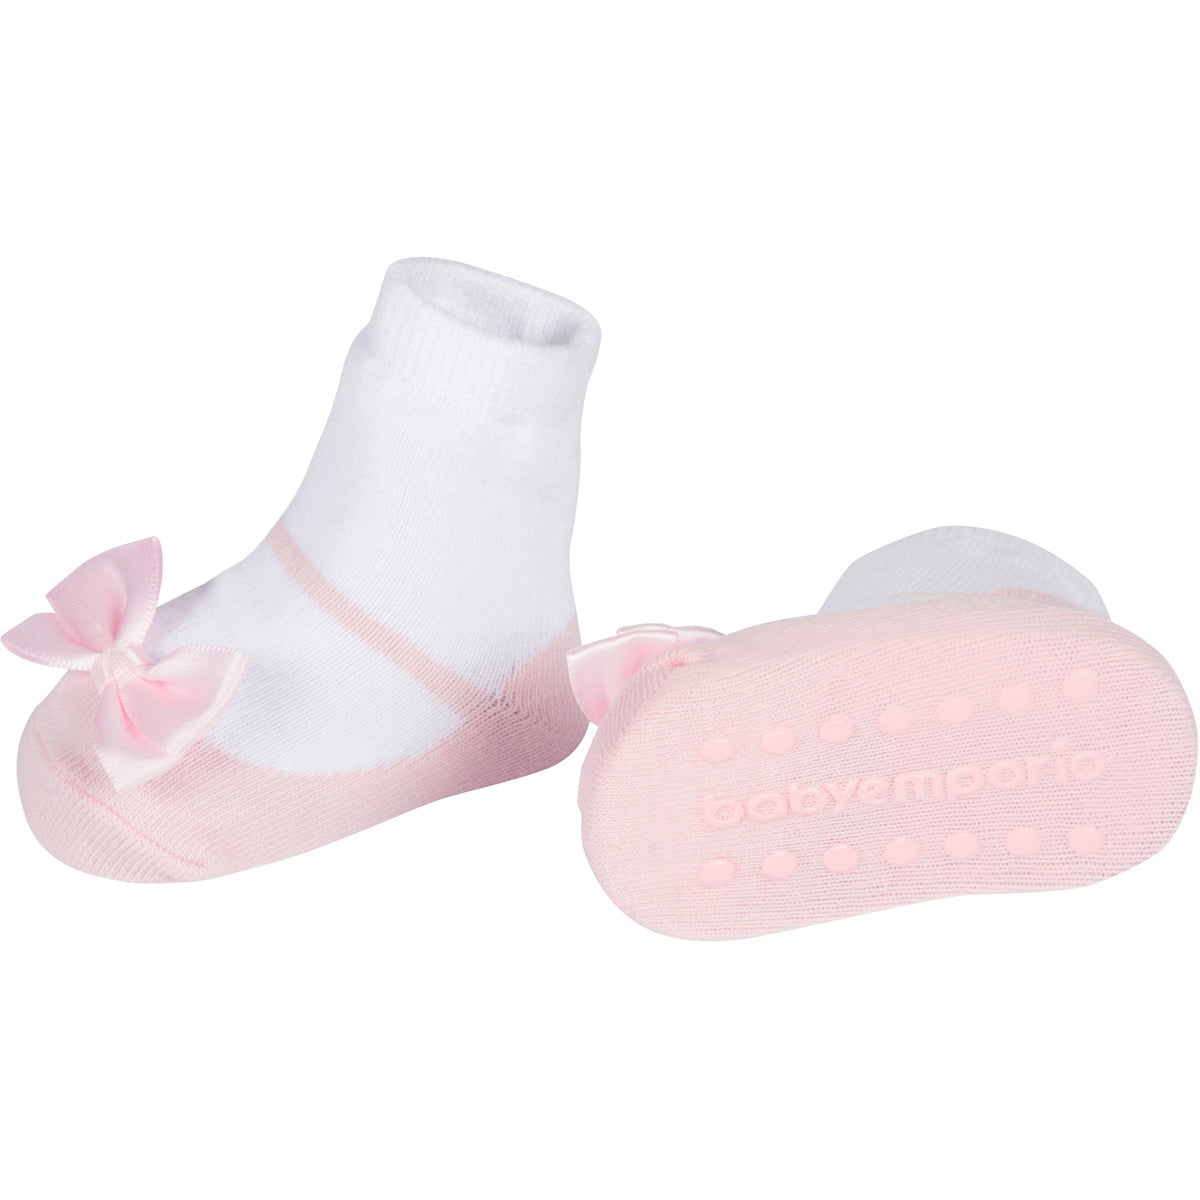 Pink baby girl socks that look like shoes with pink satin bows 0-12 months